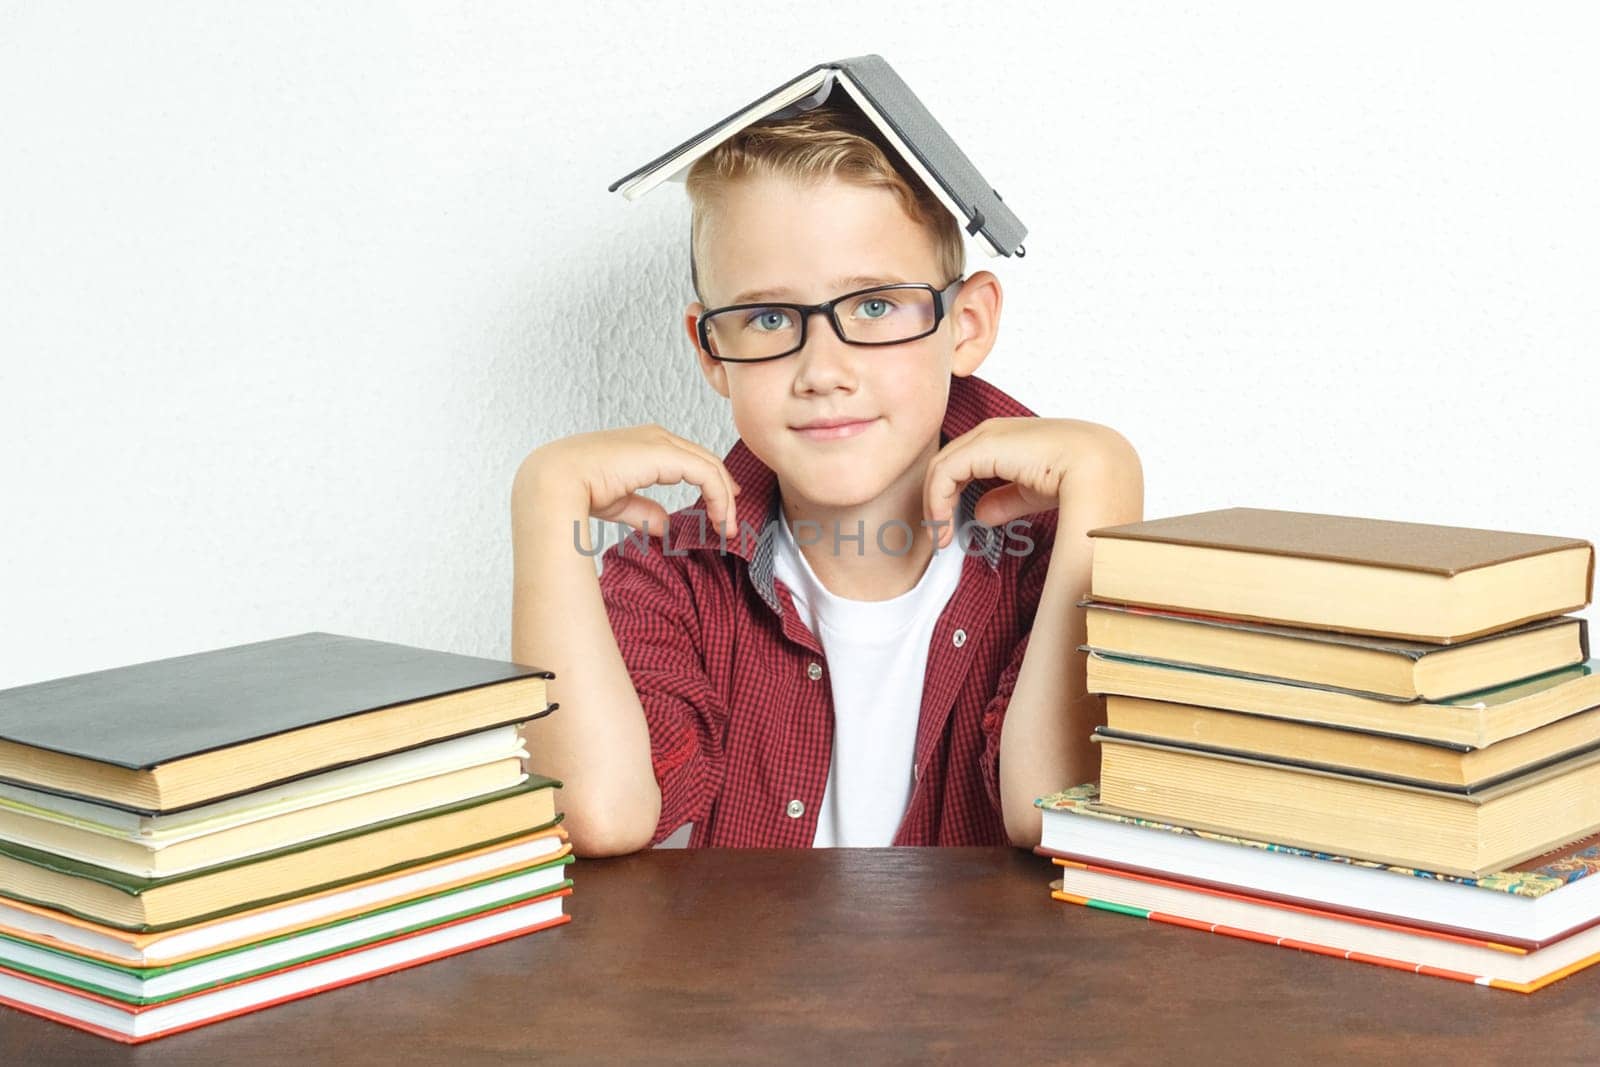 A pupil boy sits at a table with books, holding an open book on his head. by Sd28DimoN_1976